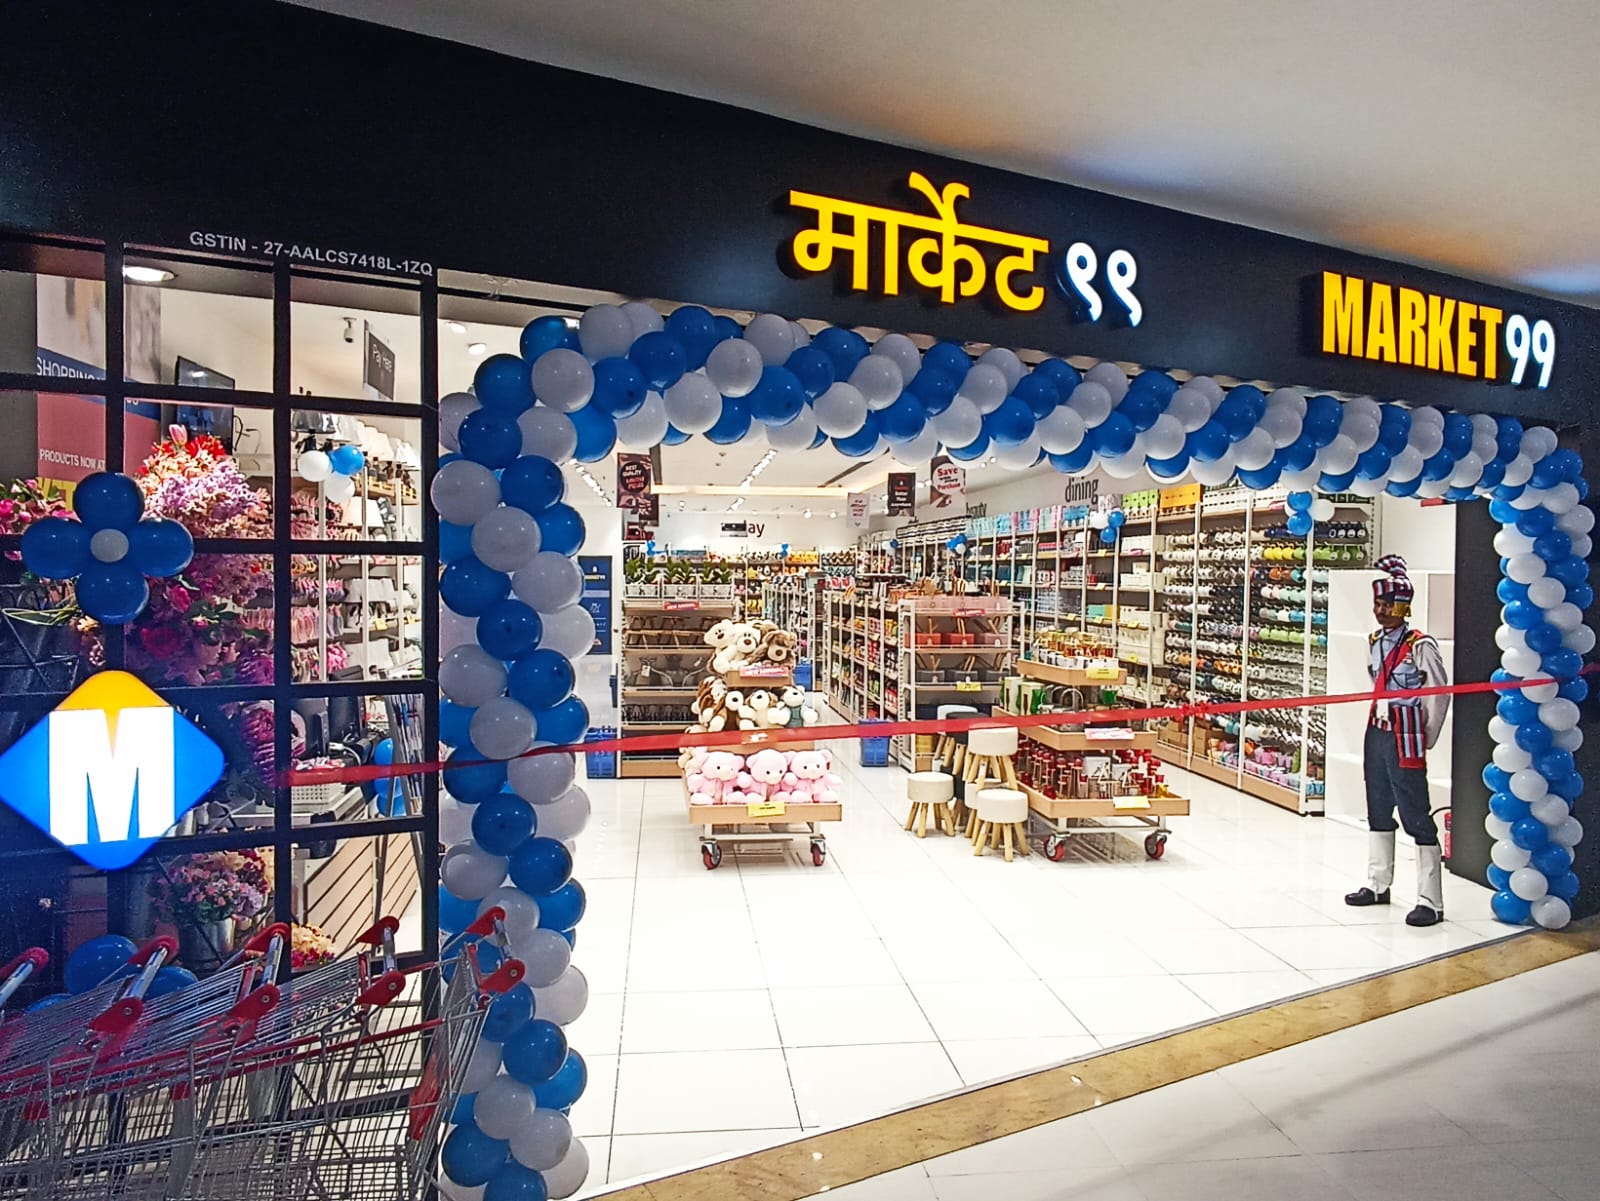 Market99 Expands Offline Presence, Opens Store in Pune